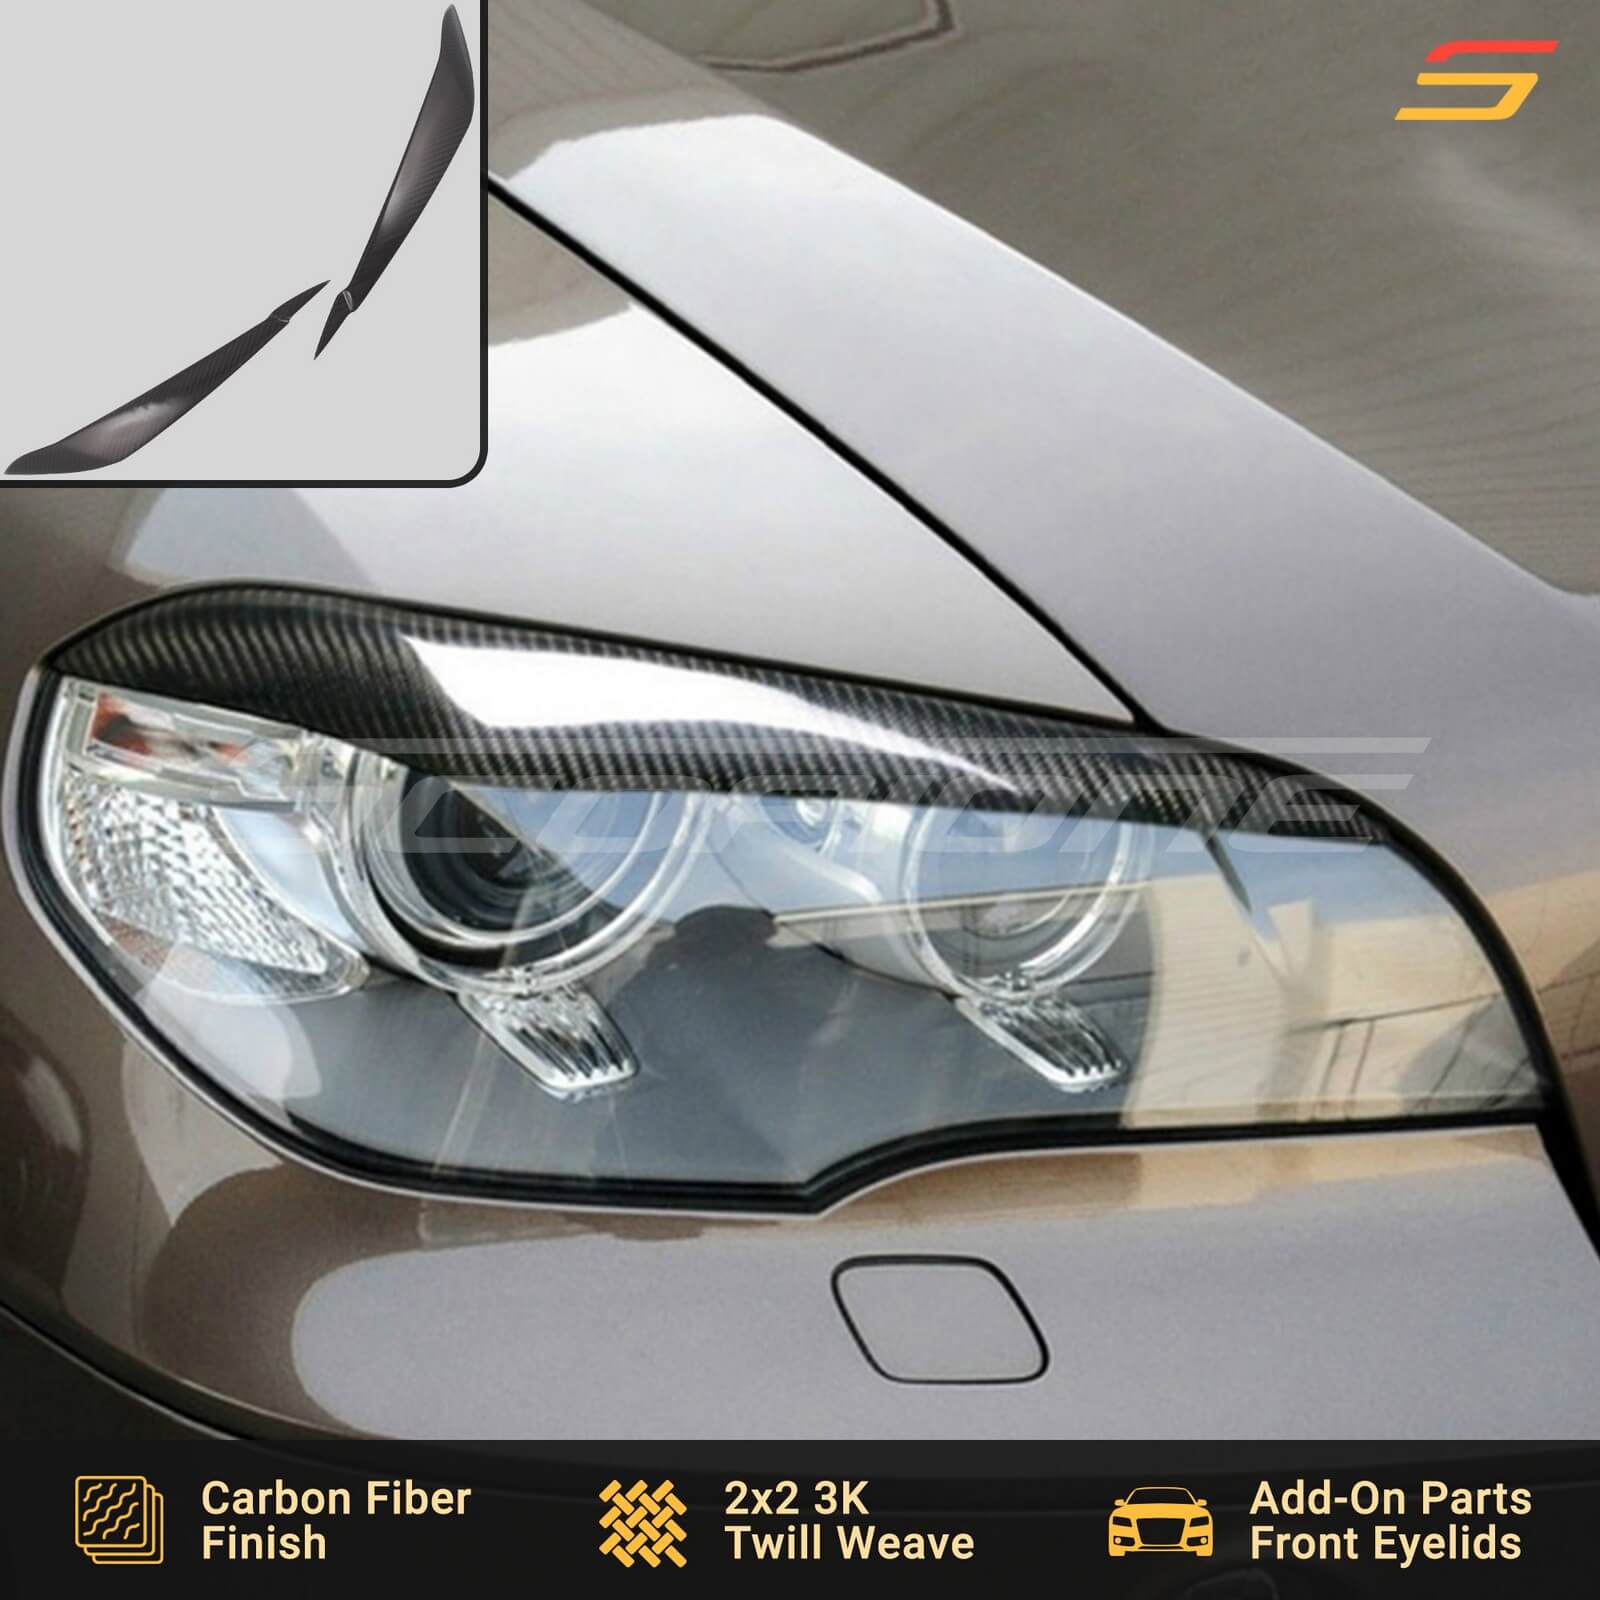 MV-Tuning Front Eyelids Eyebrows Headlights Covers for BMW X5 E70